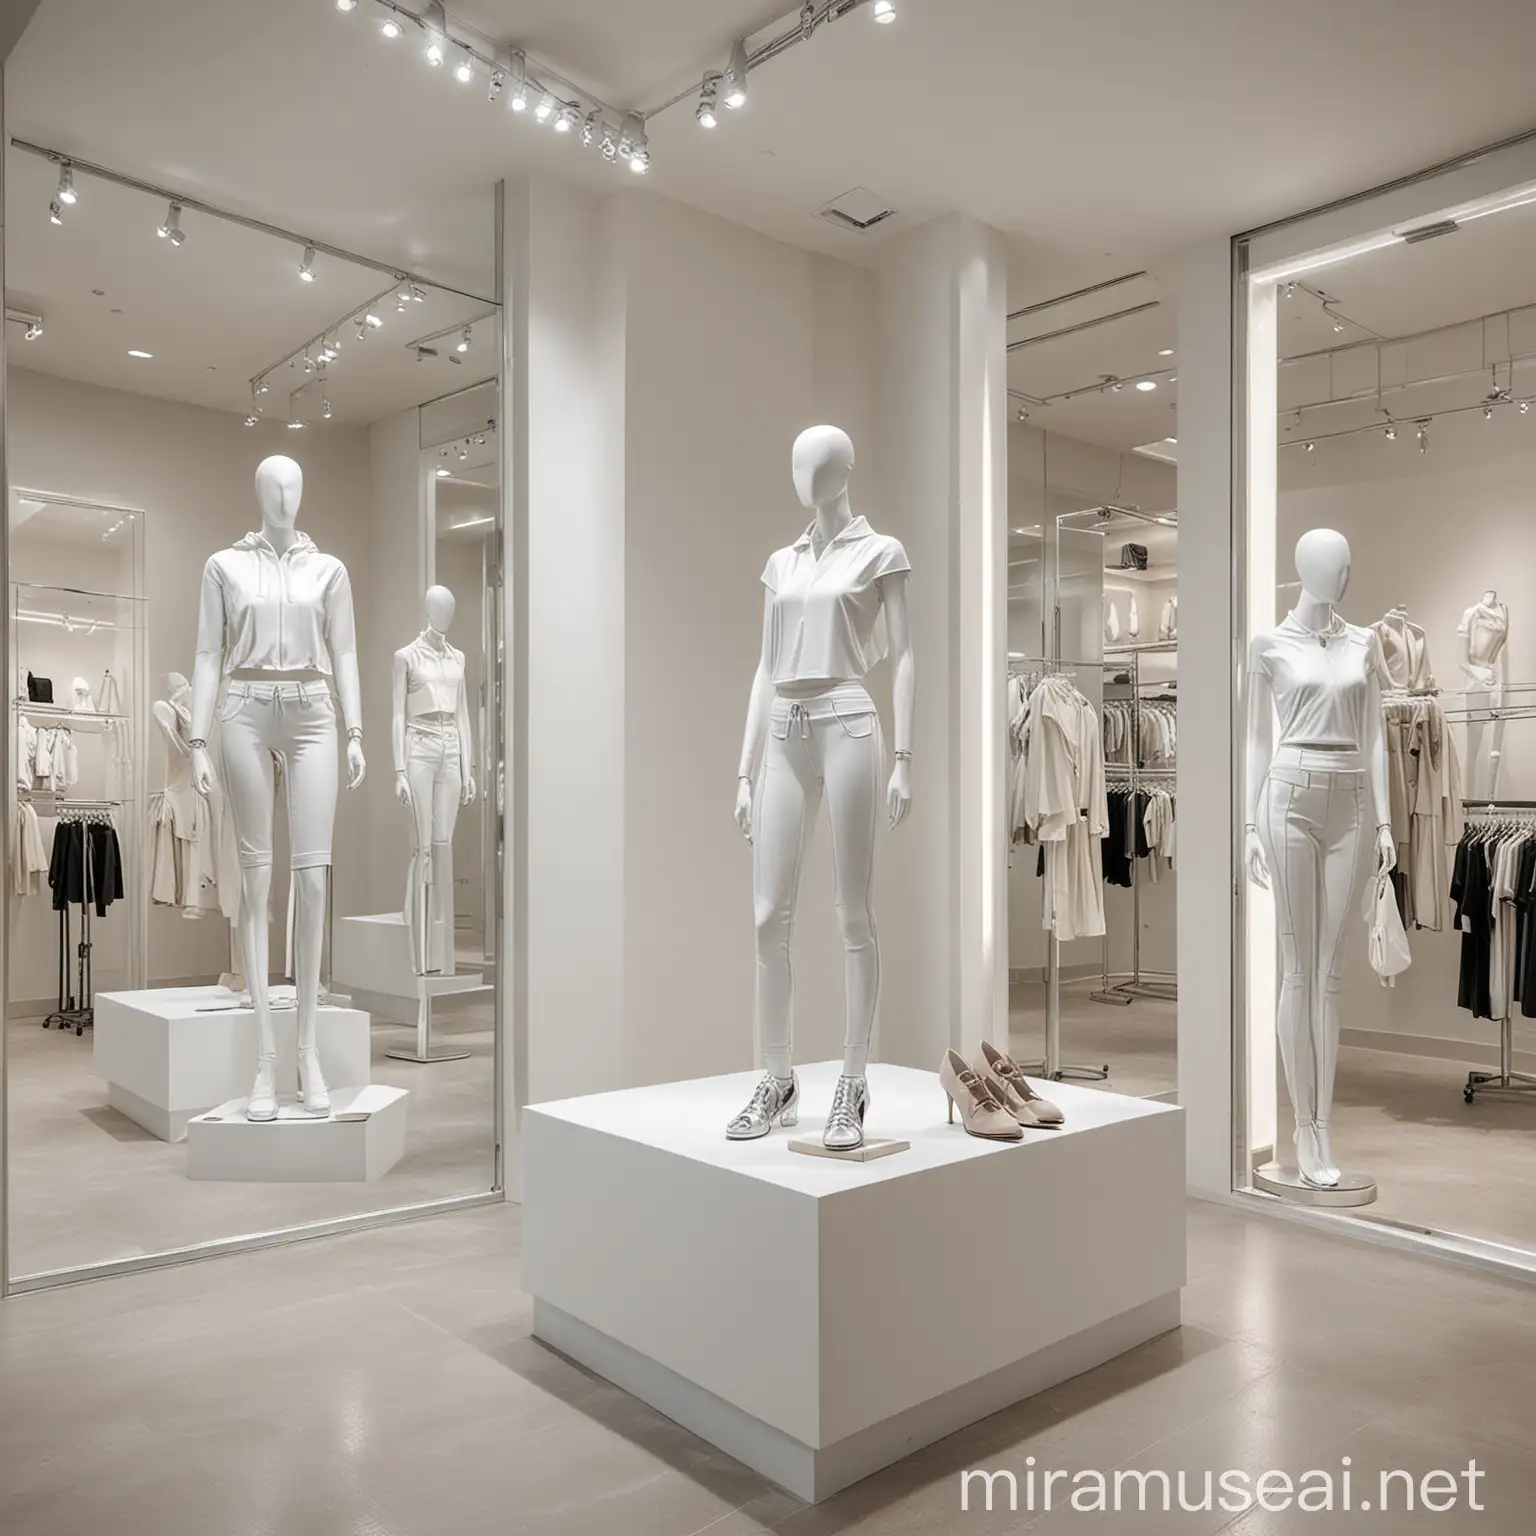 Design a high-end activewear boutique featuring a sleek white decor, clear windows, and a modern steel aesthetic. Add mannequins, clothing and shoes in neutral colors 